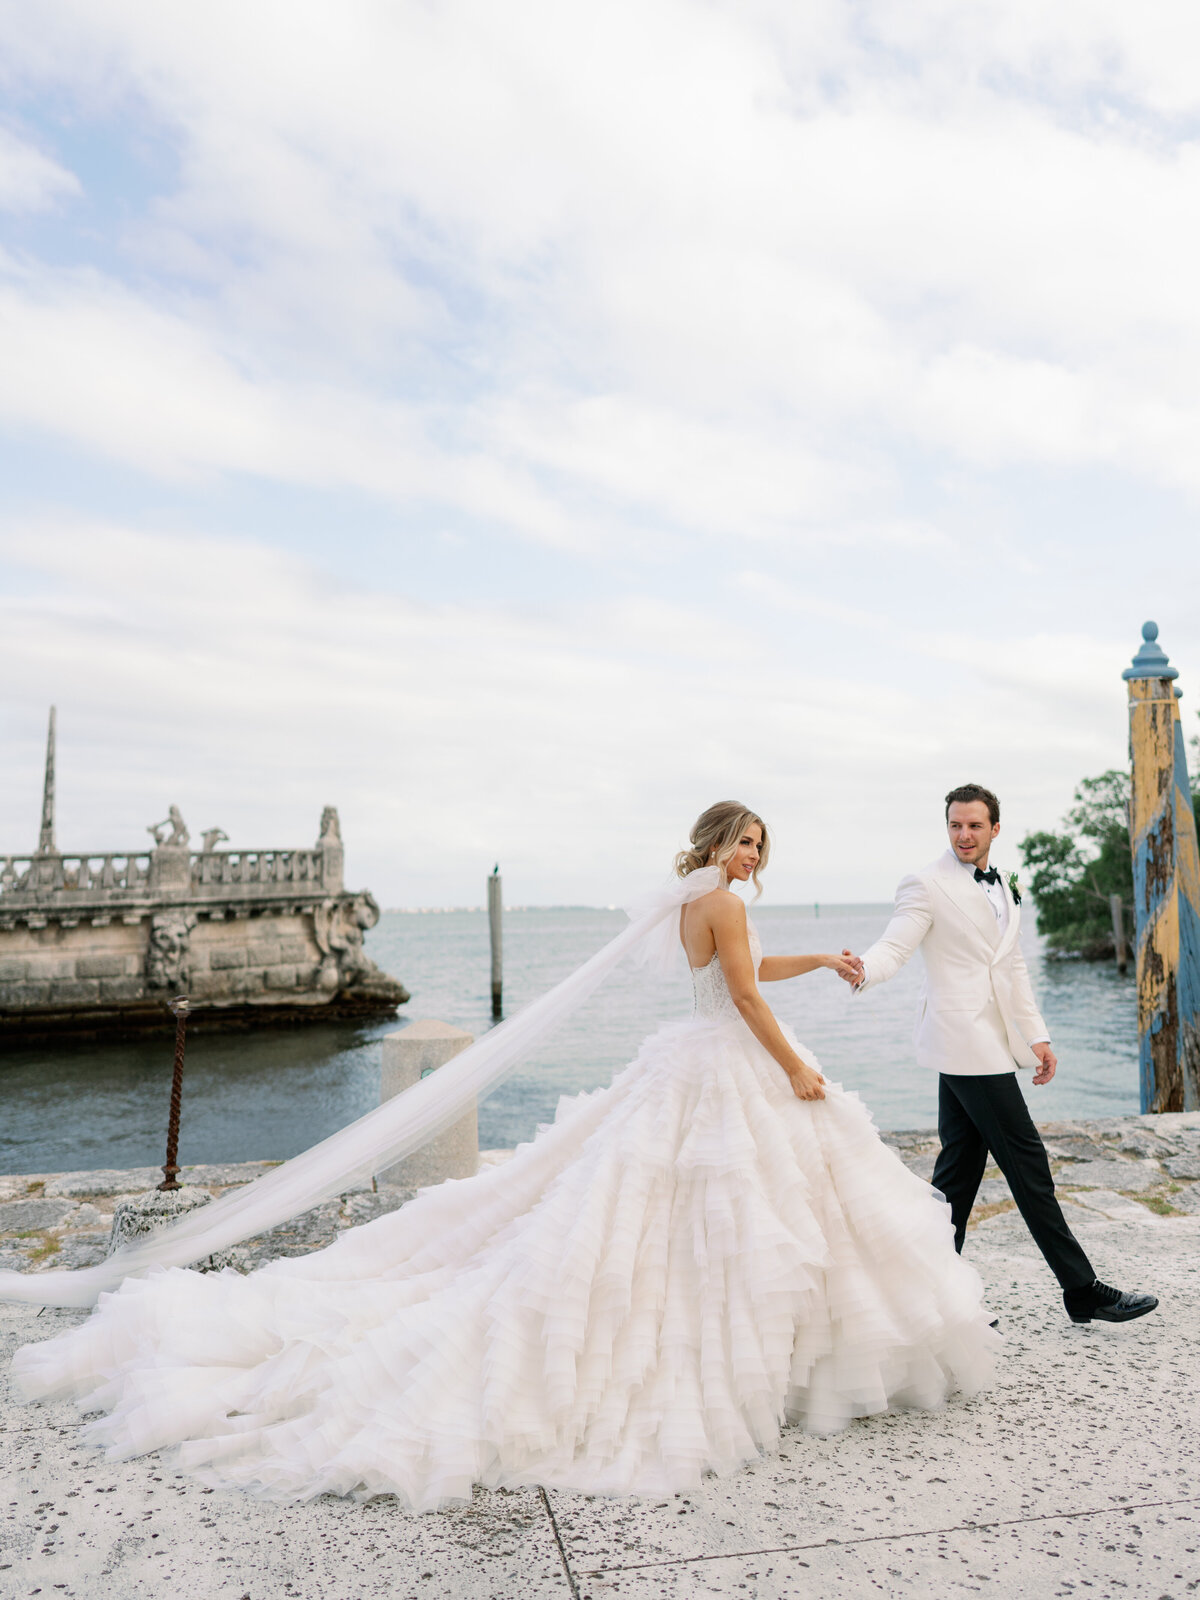 Liz Andolina Photography Destination Wedding Photographer in Italy, New York, Across the East Coast Editorial, heritage-quality images for stylish couples Kendall & Austen Gray-Liz Andolina Photography-11